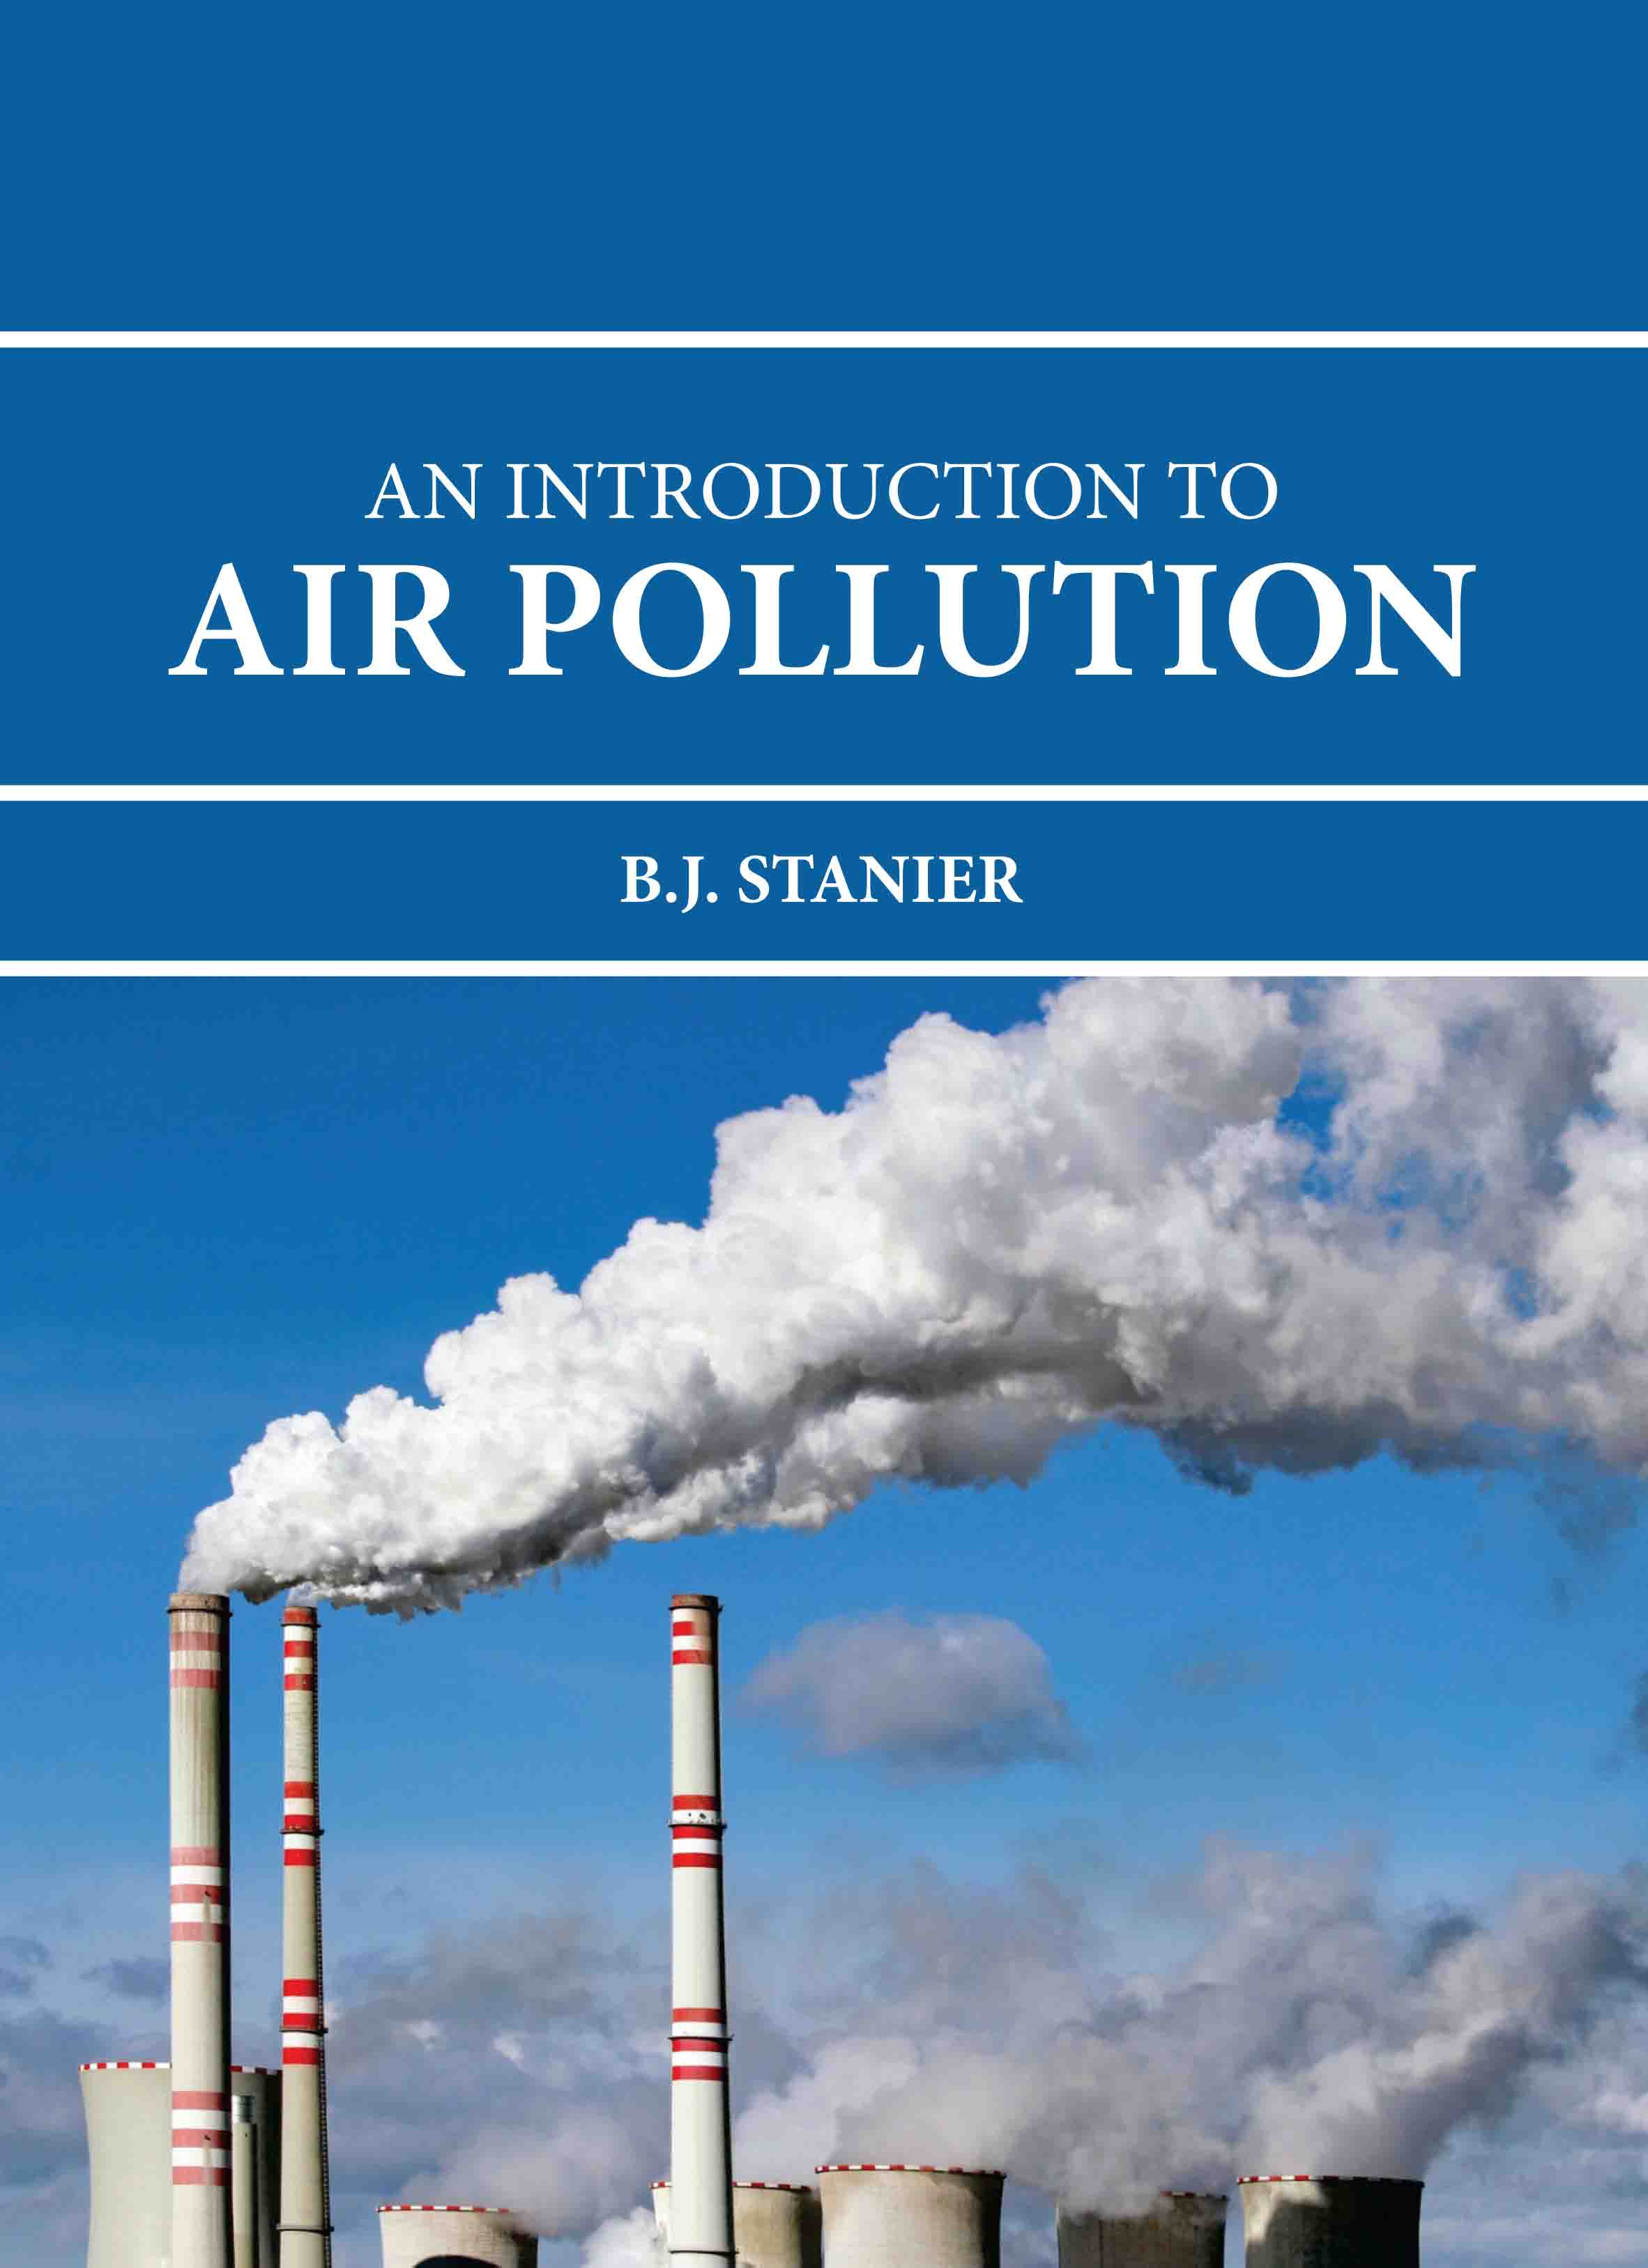 An Introduction to Air Pollution